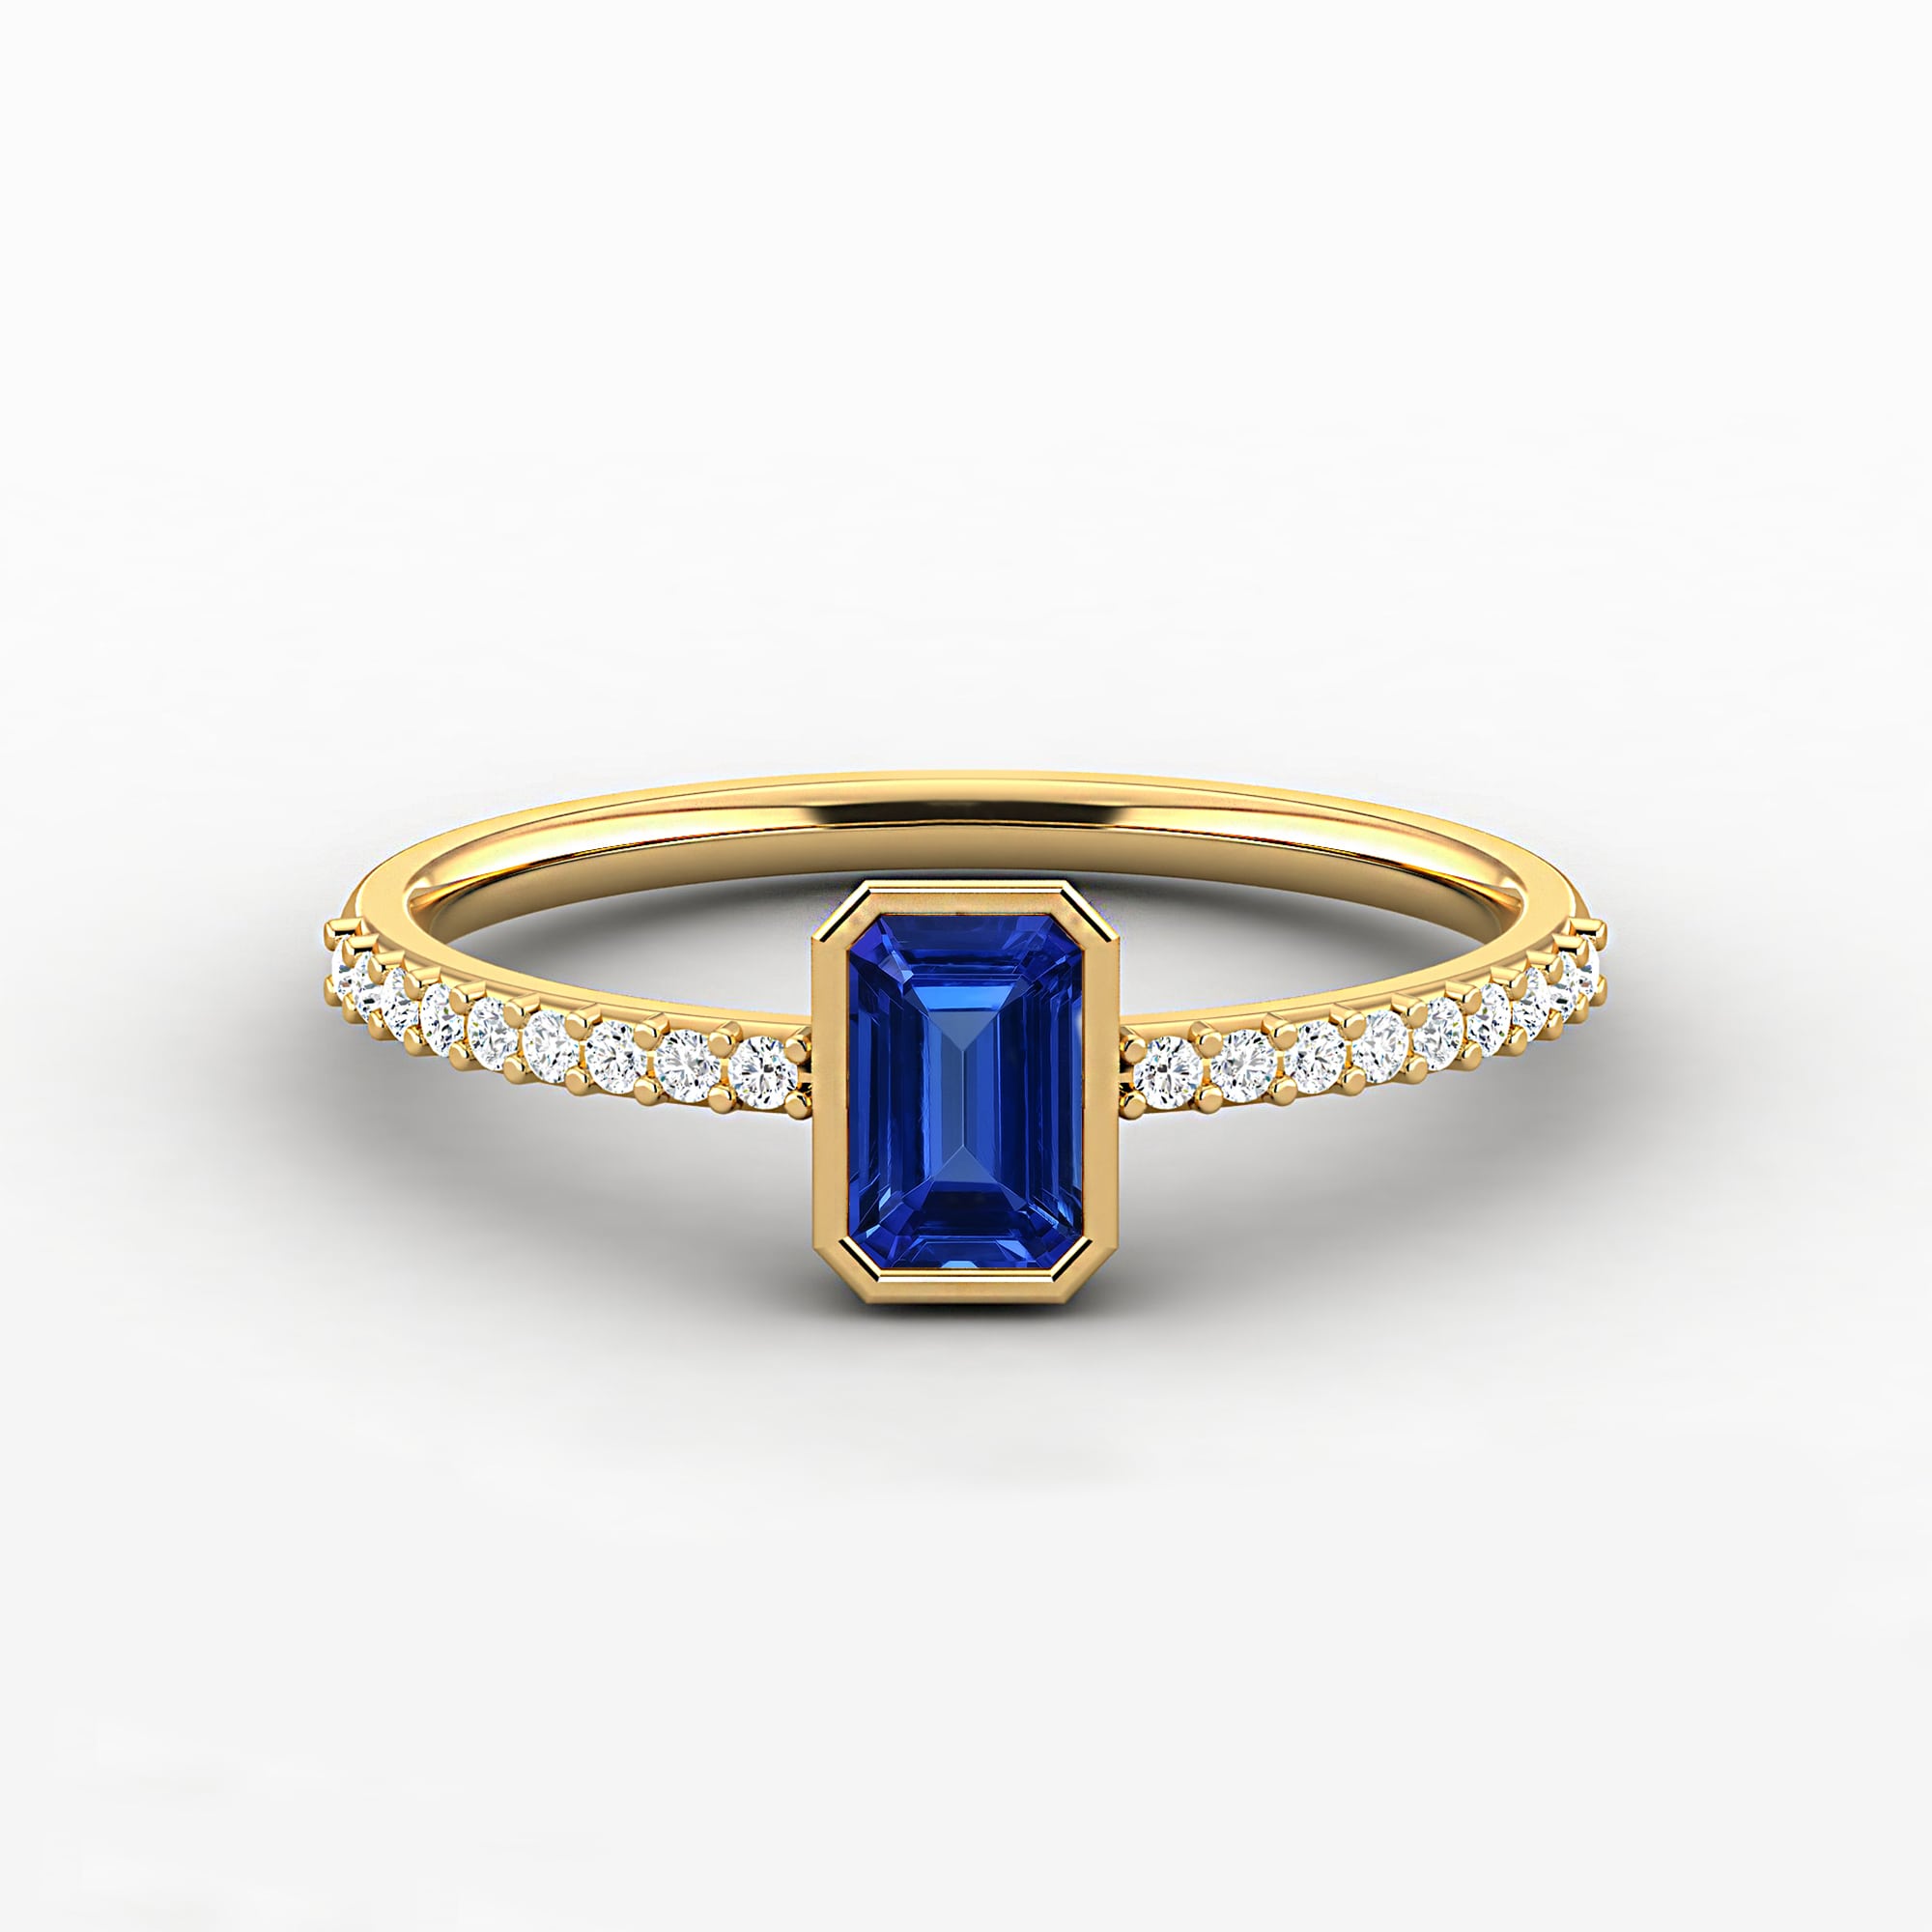 Emerald Cut Sapphire Ring in 14k Solid Gold